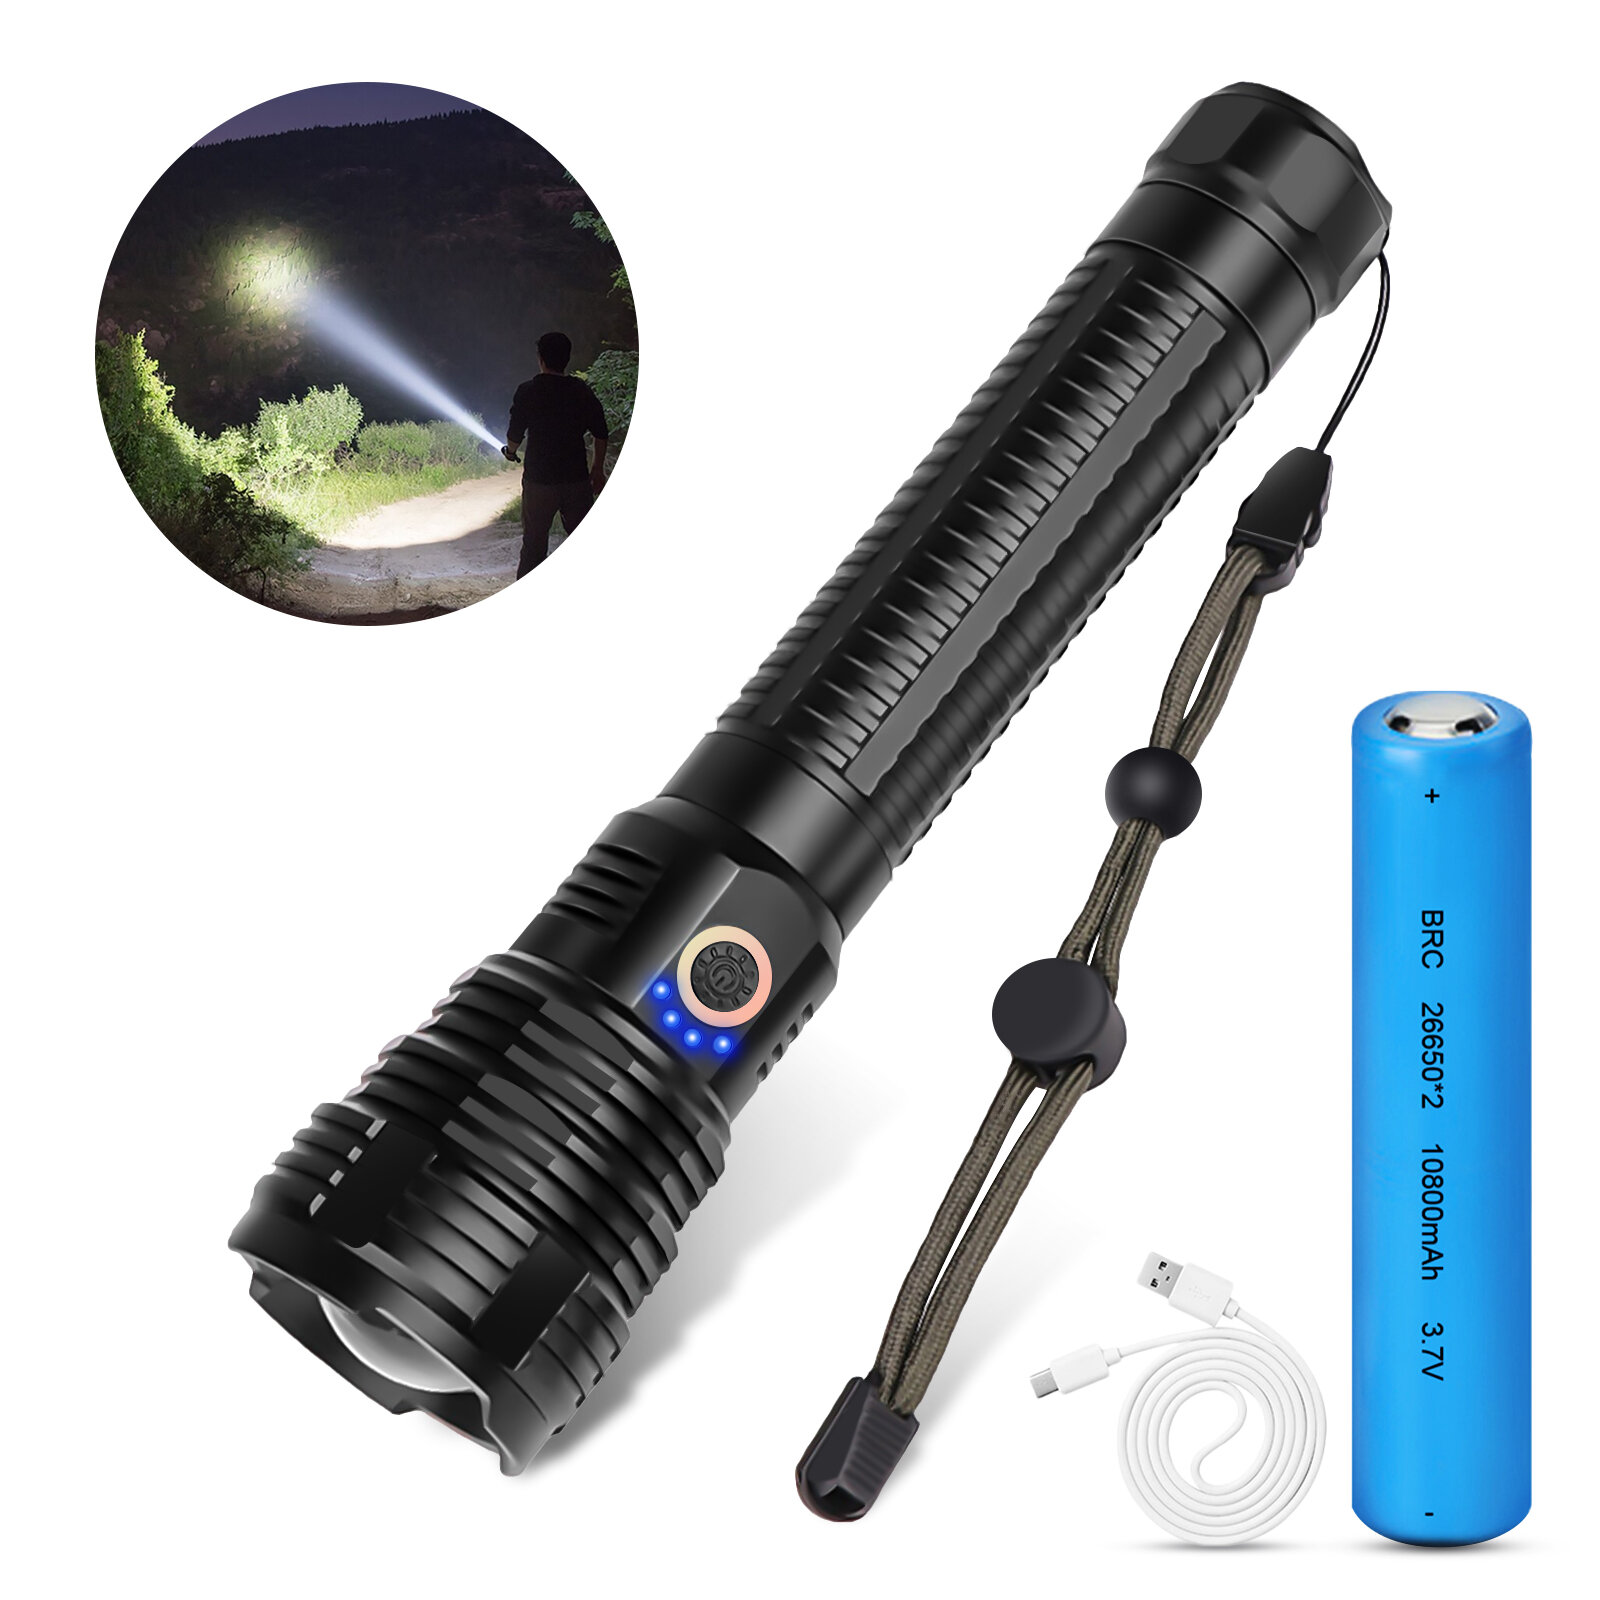 OUTERDO Upgraded USB Rechargeable Xhp90 LED Flashlight 90000 Lumens Zoomable & 3 Modes Lighting Suitable for Outdoor Hik